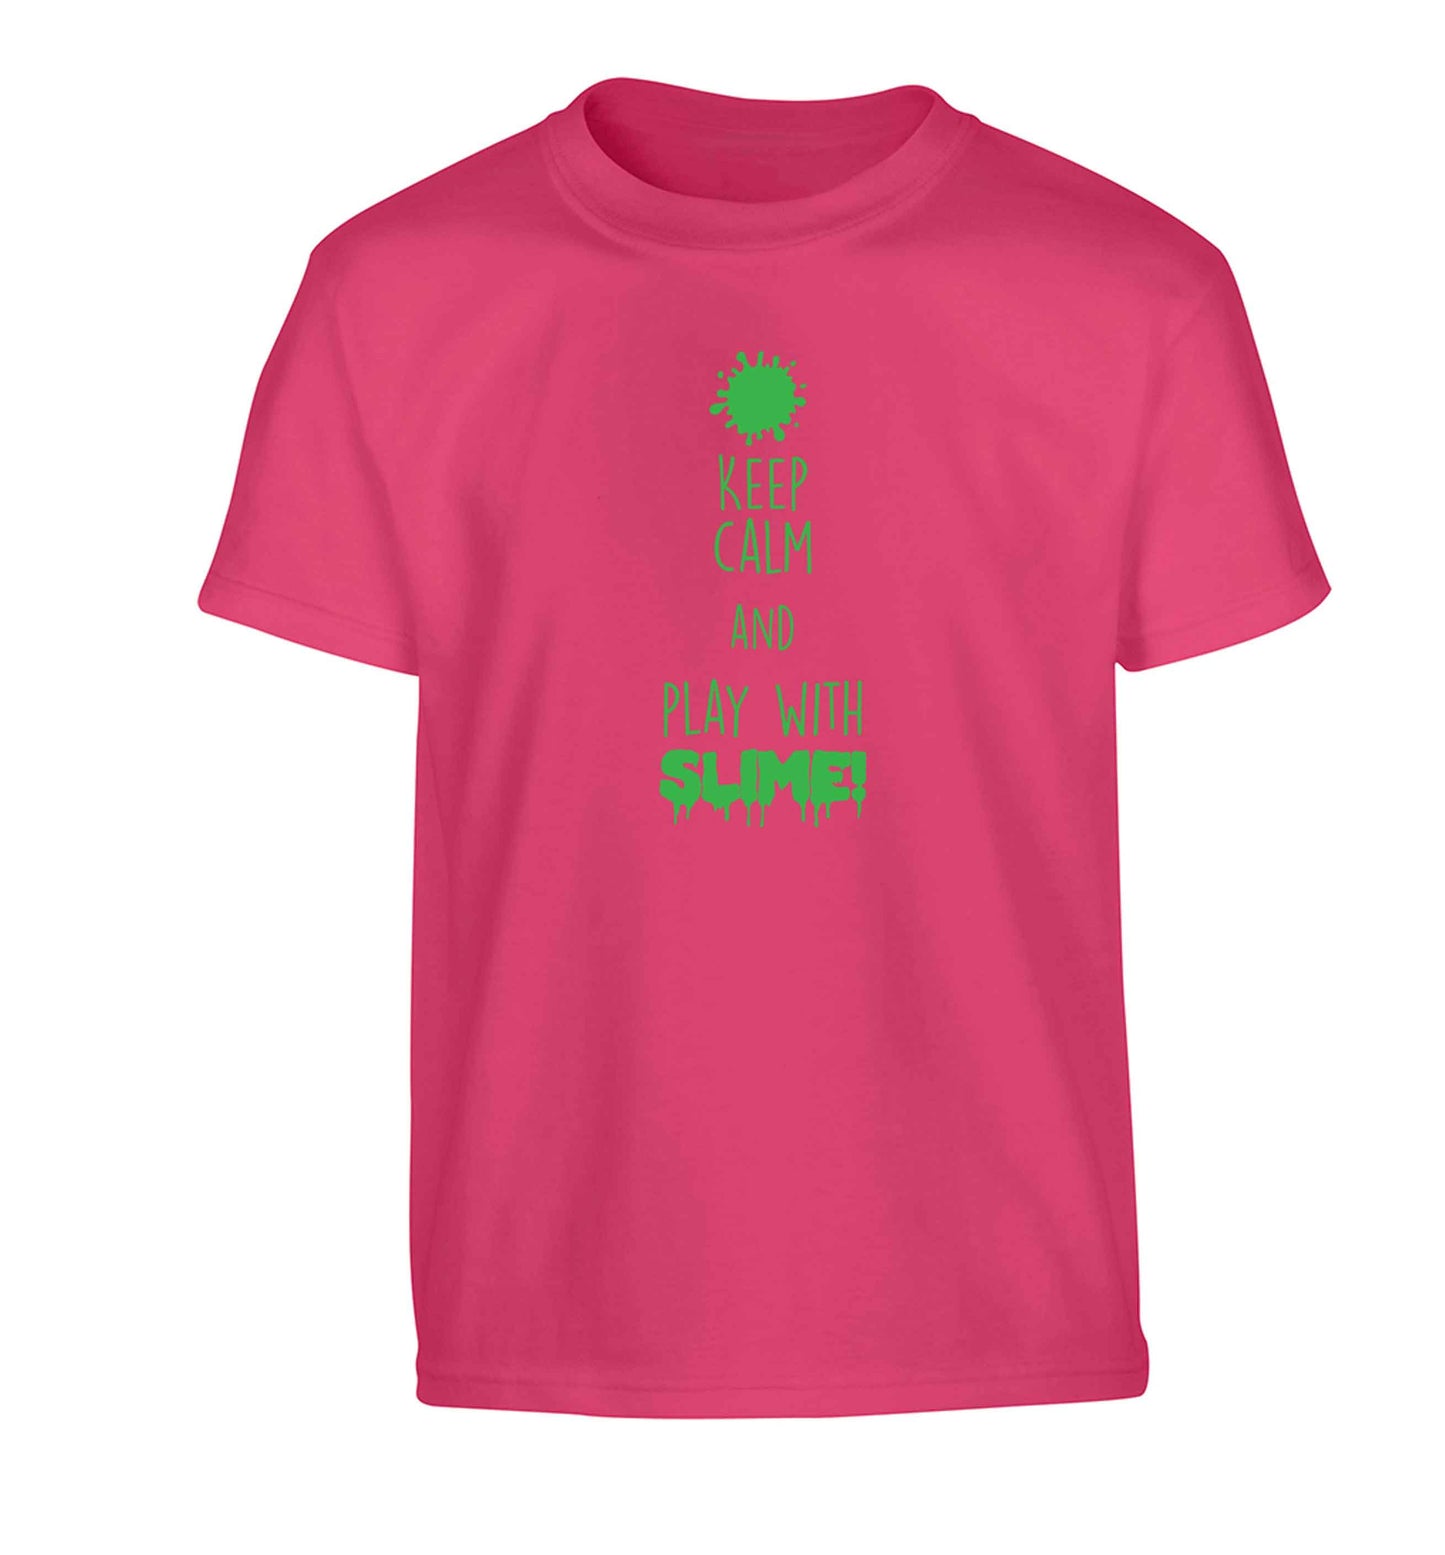 Neon green keep calm and play with slime!Children's pink Tshirt 12-13 Years